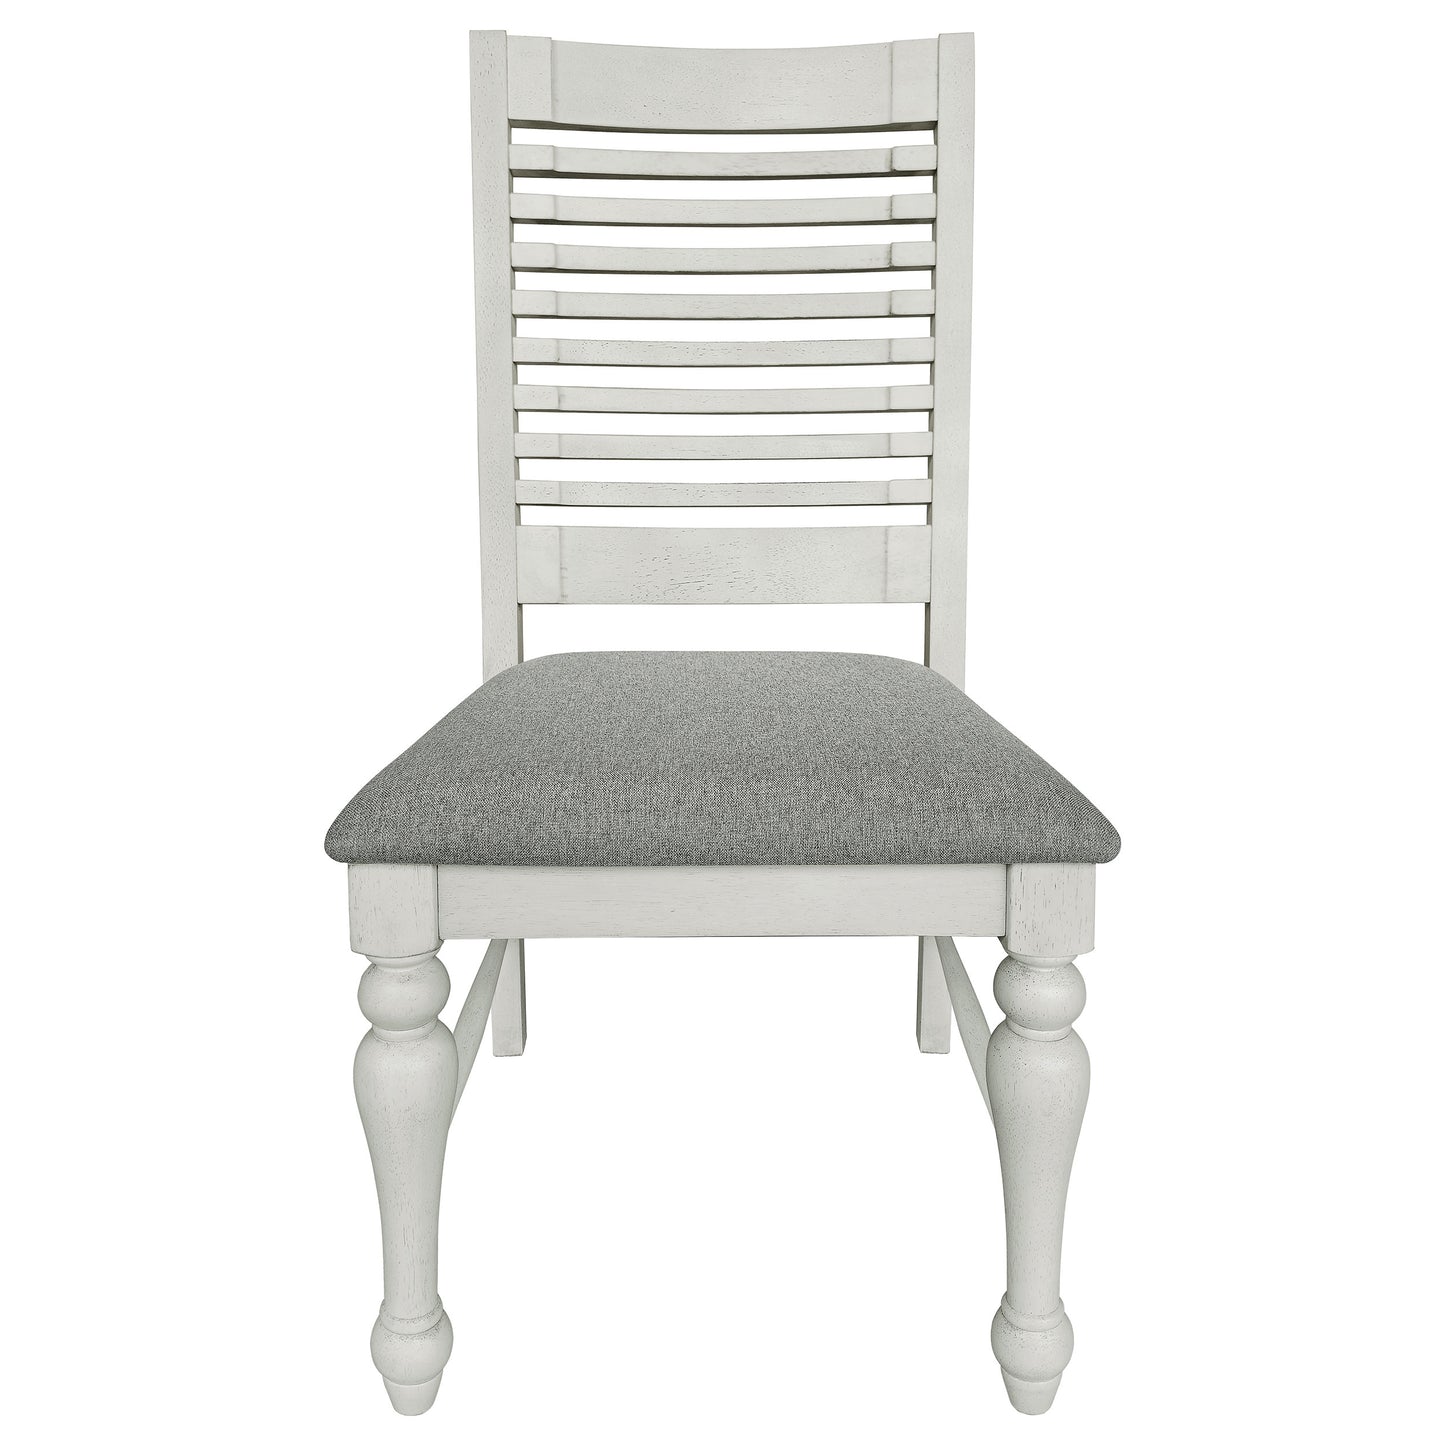 Aventine Ladder Back Dining Side Chair with Upholstered Seat Vintage Chalk and Grey (Set of 2)